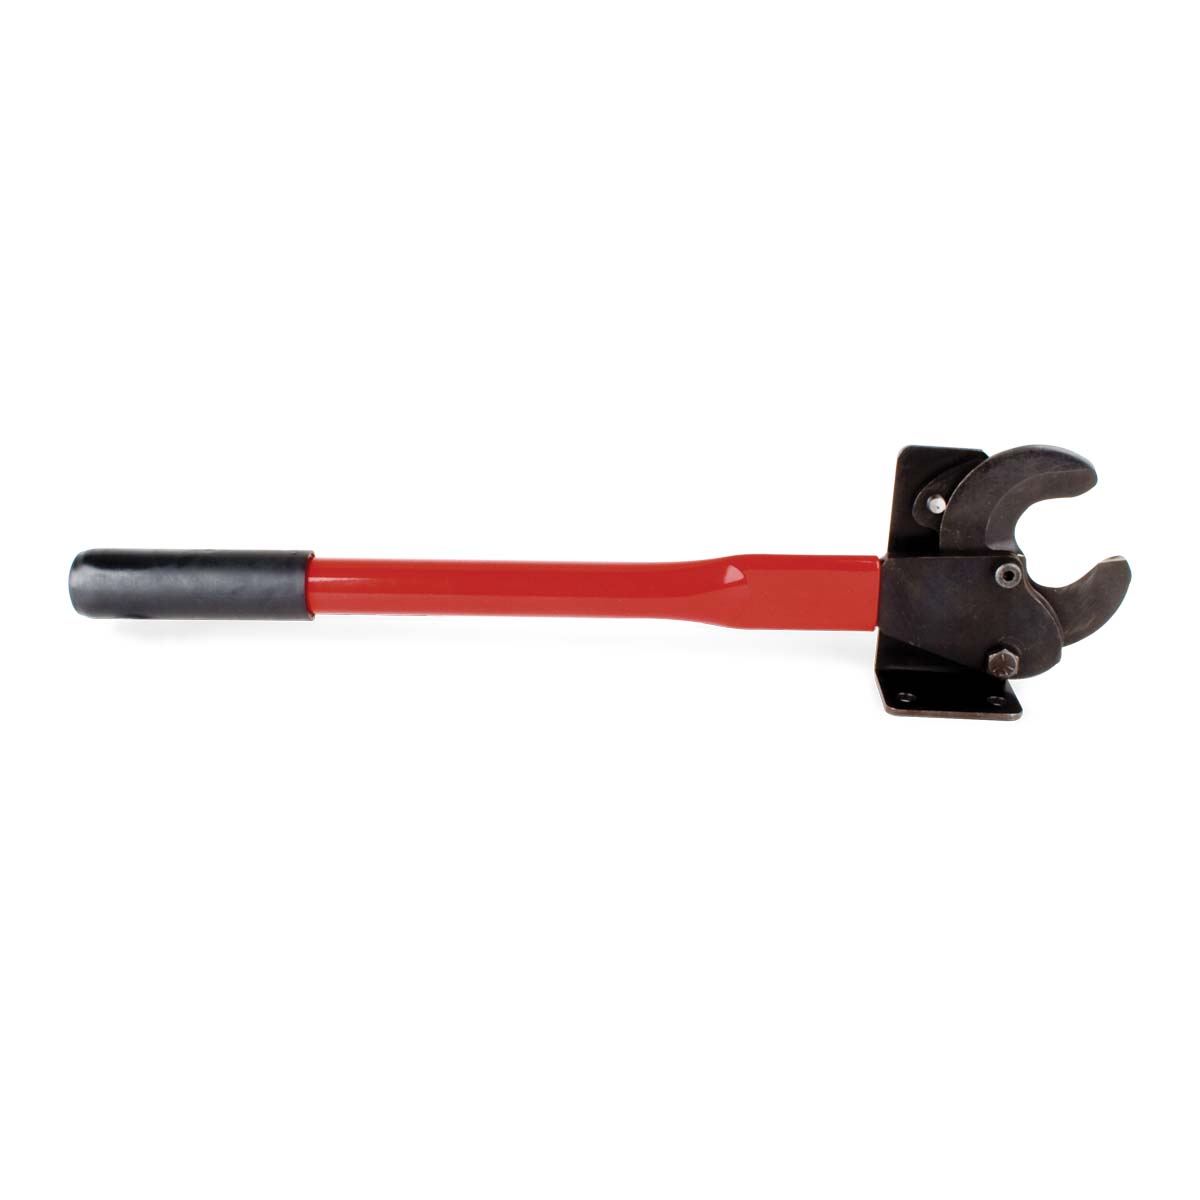 HIT Cable Cutter Hand-Held 7.5 — Cable Bullet